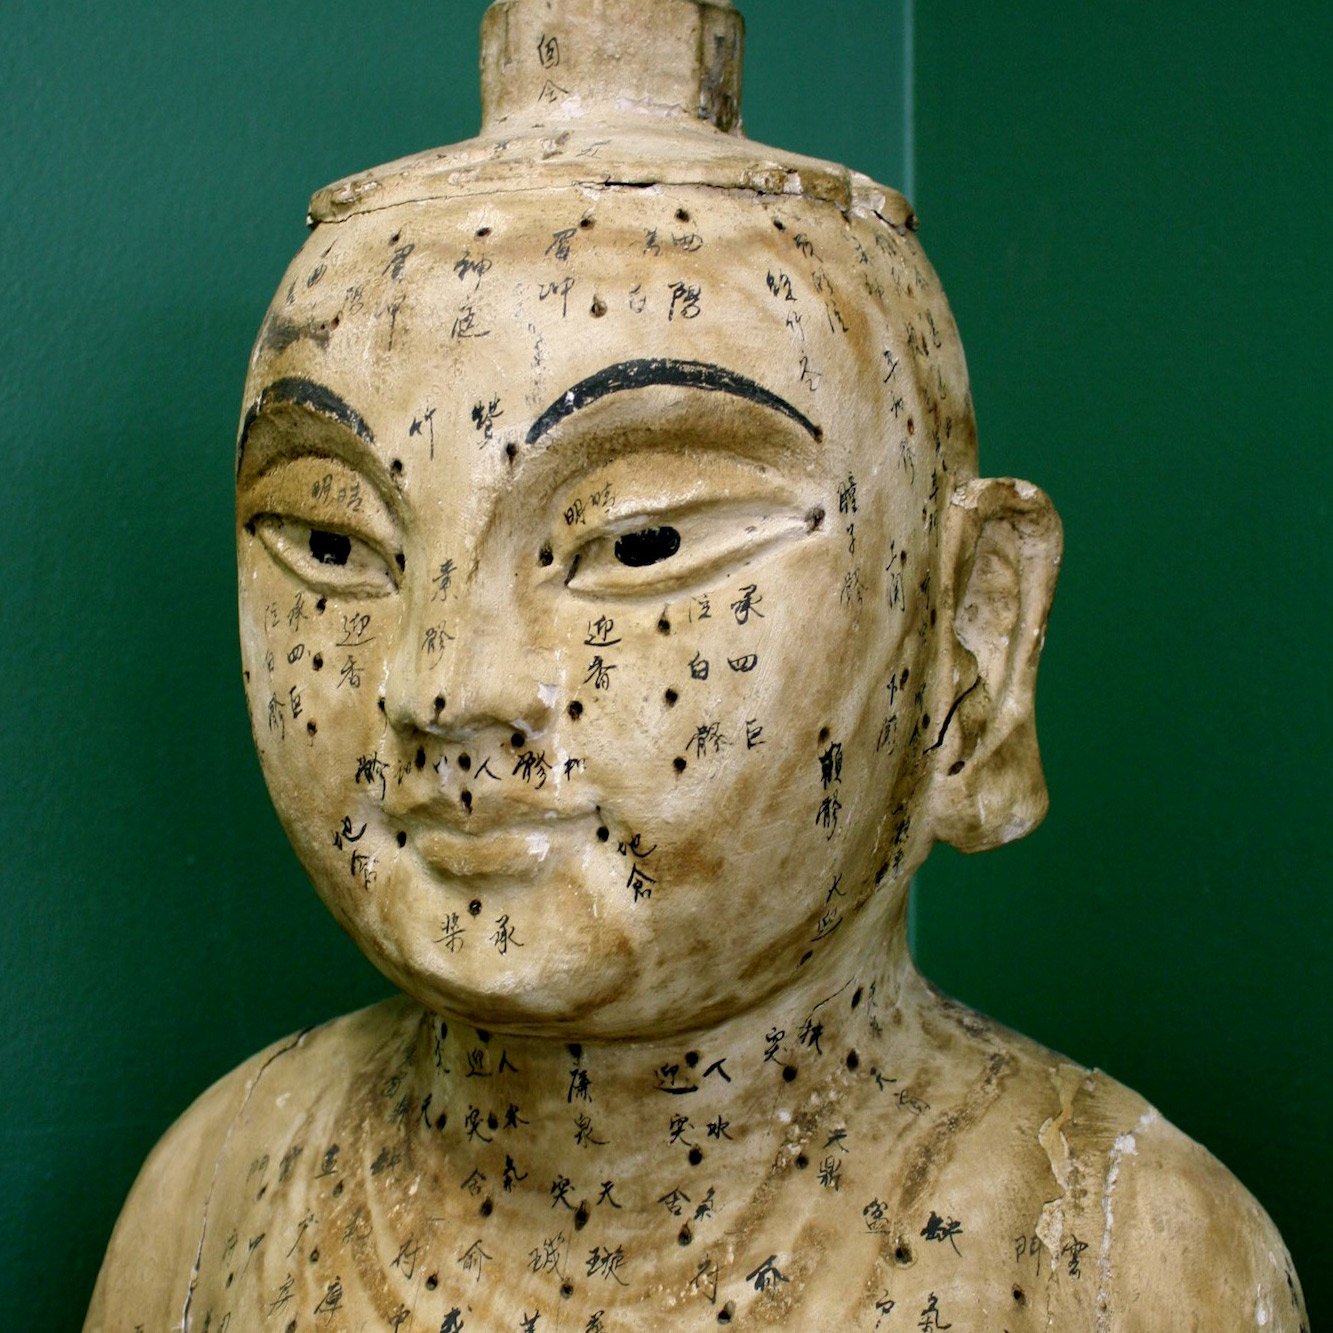 A photo of a statue showing acupuncture points